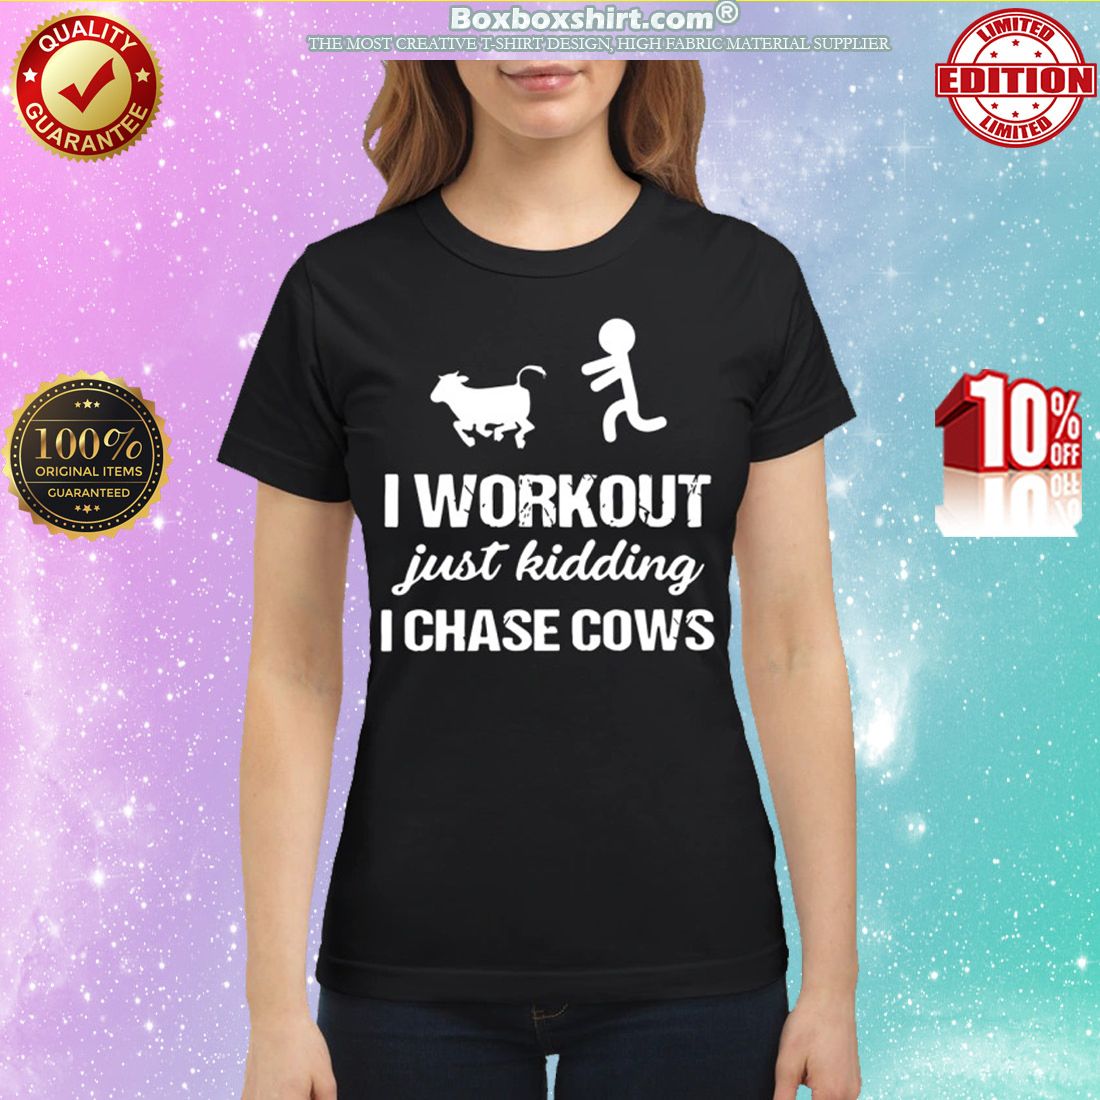 I workout just kidding I chase cows classic shirt